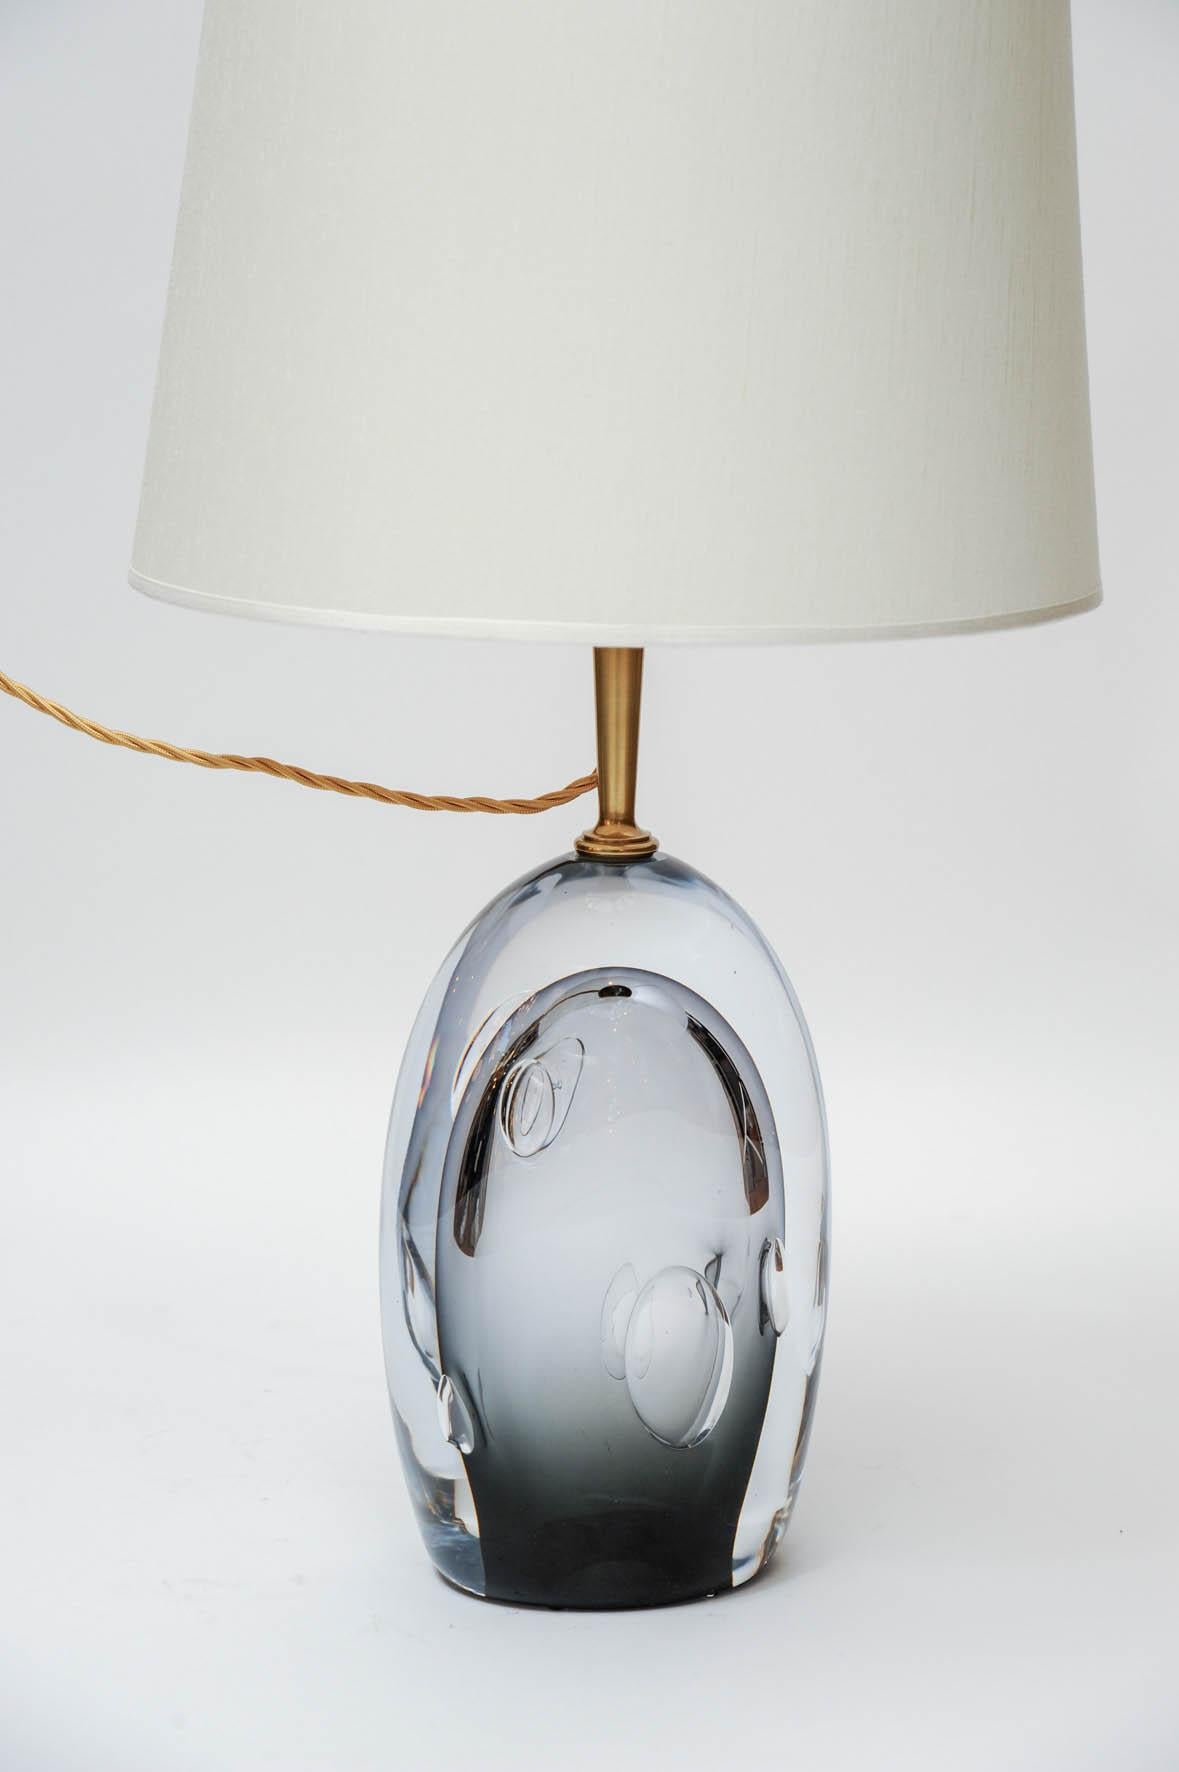 Pair of table lamps made by Italian edition house Esperia for Glustin Luminaires.

Big glass piece lightly tinted in black giving the lamp almost a purple colour and air bubble trapped inside, topped with a brass neck.